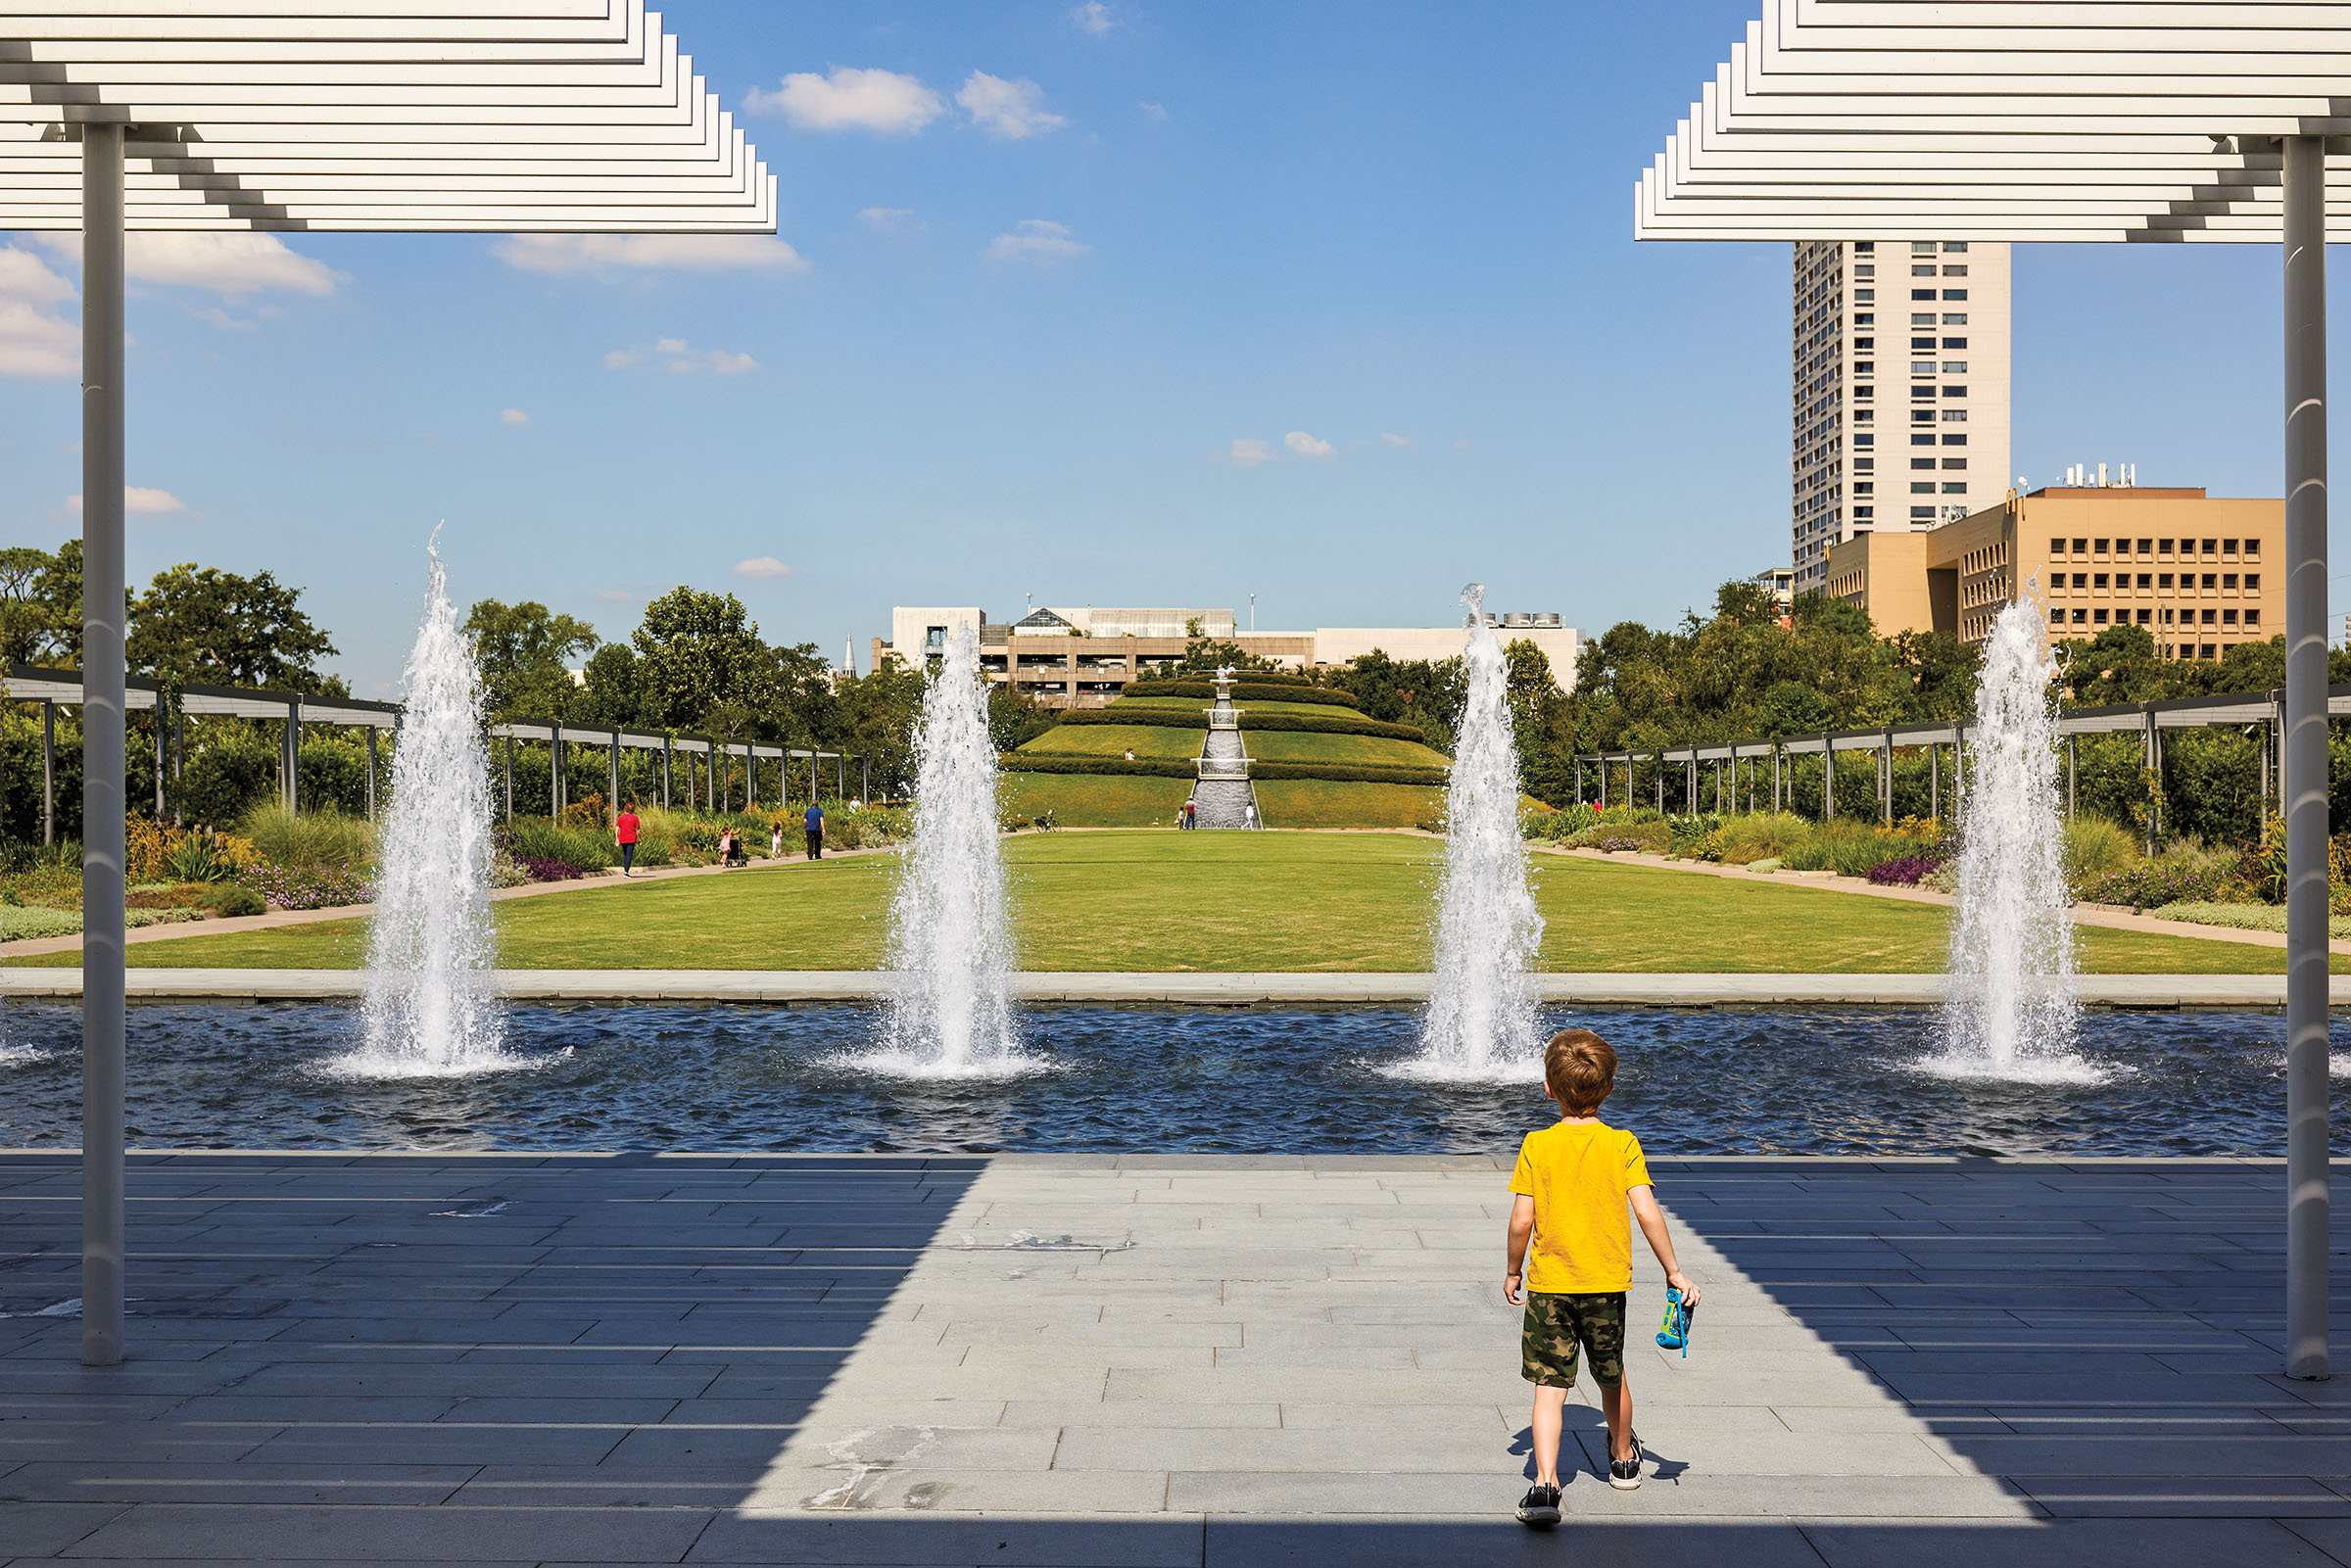 A young man in a yellow shirt stands in front of a large blue fountain, with green grass 